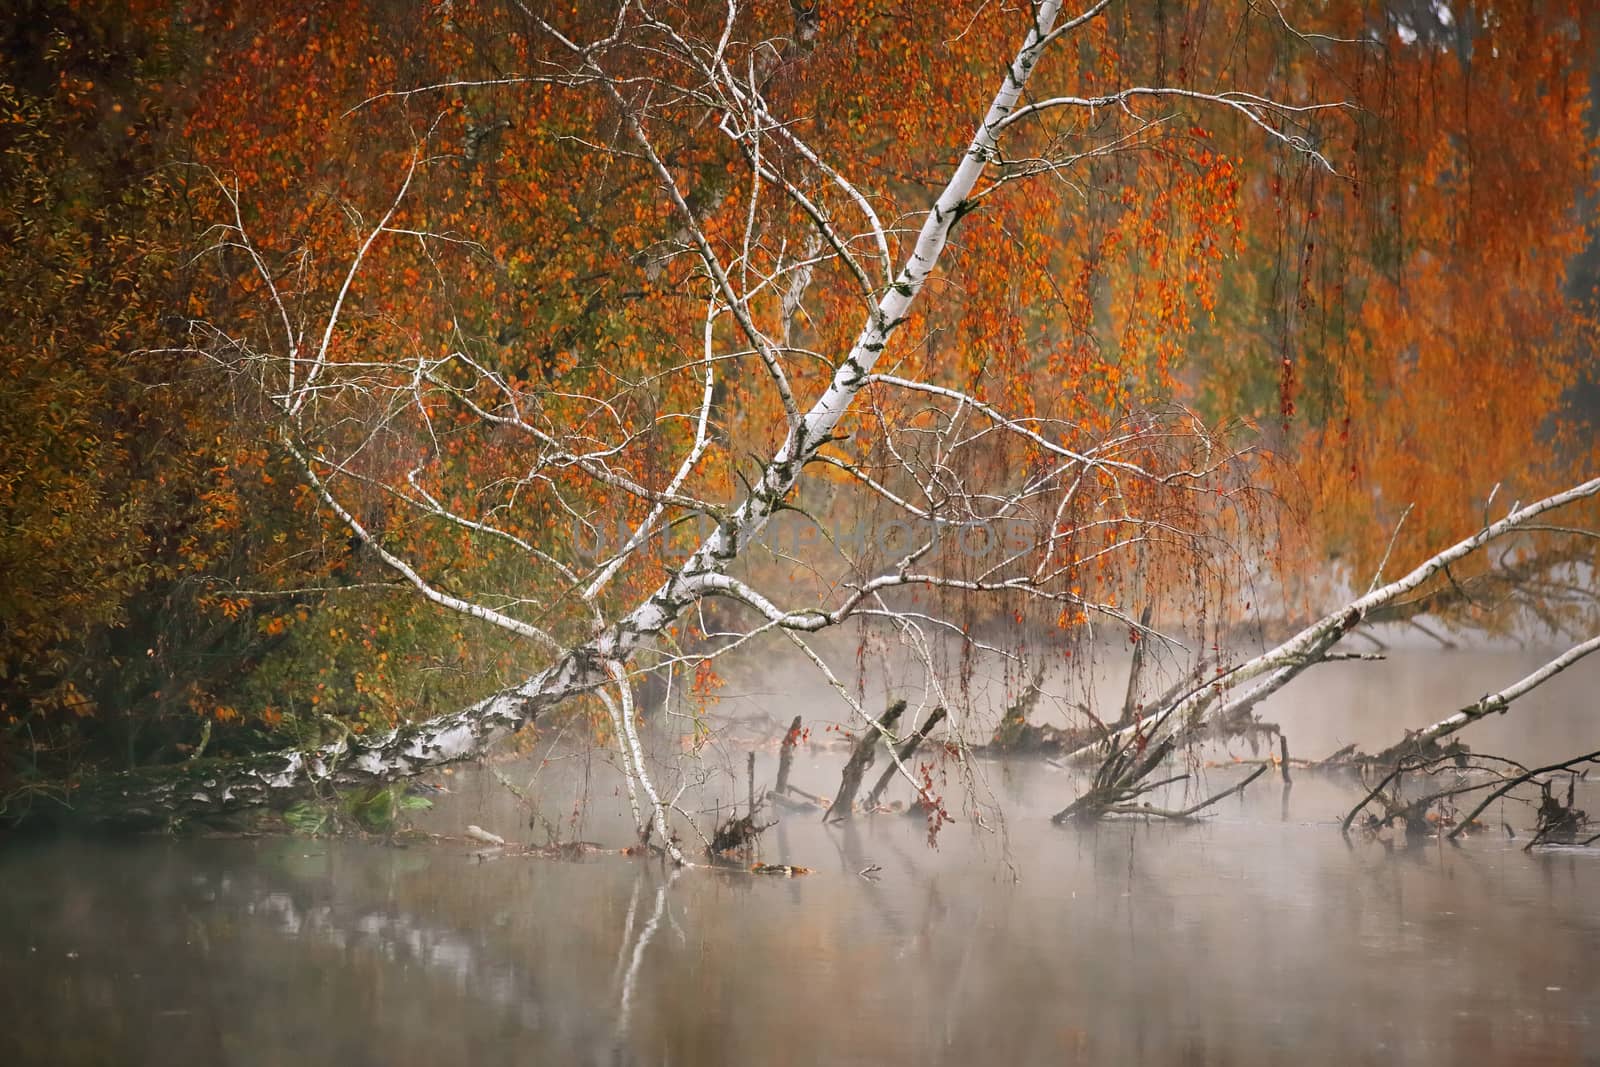 Birch tree near the river on a misty morning by weise_maxim